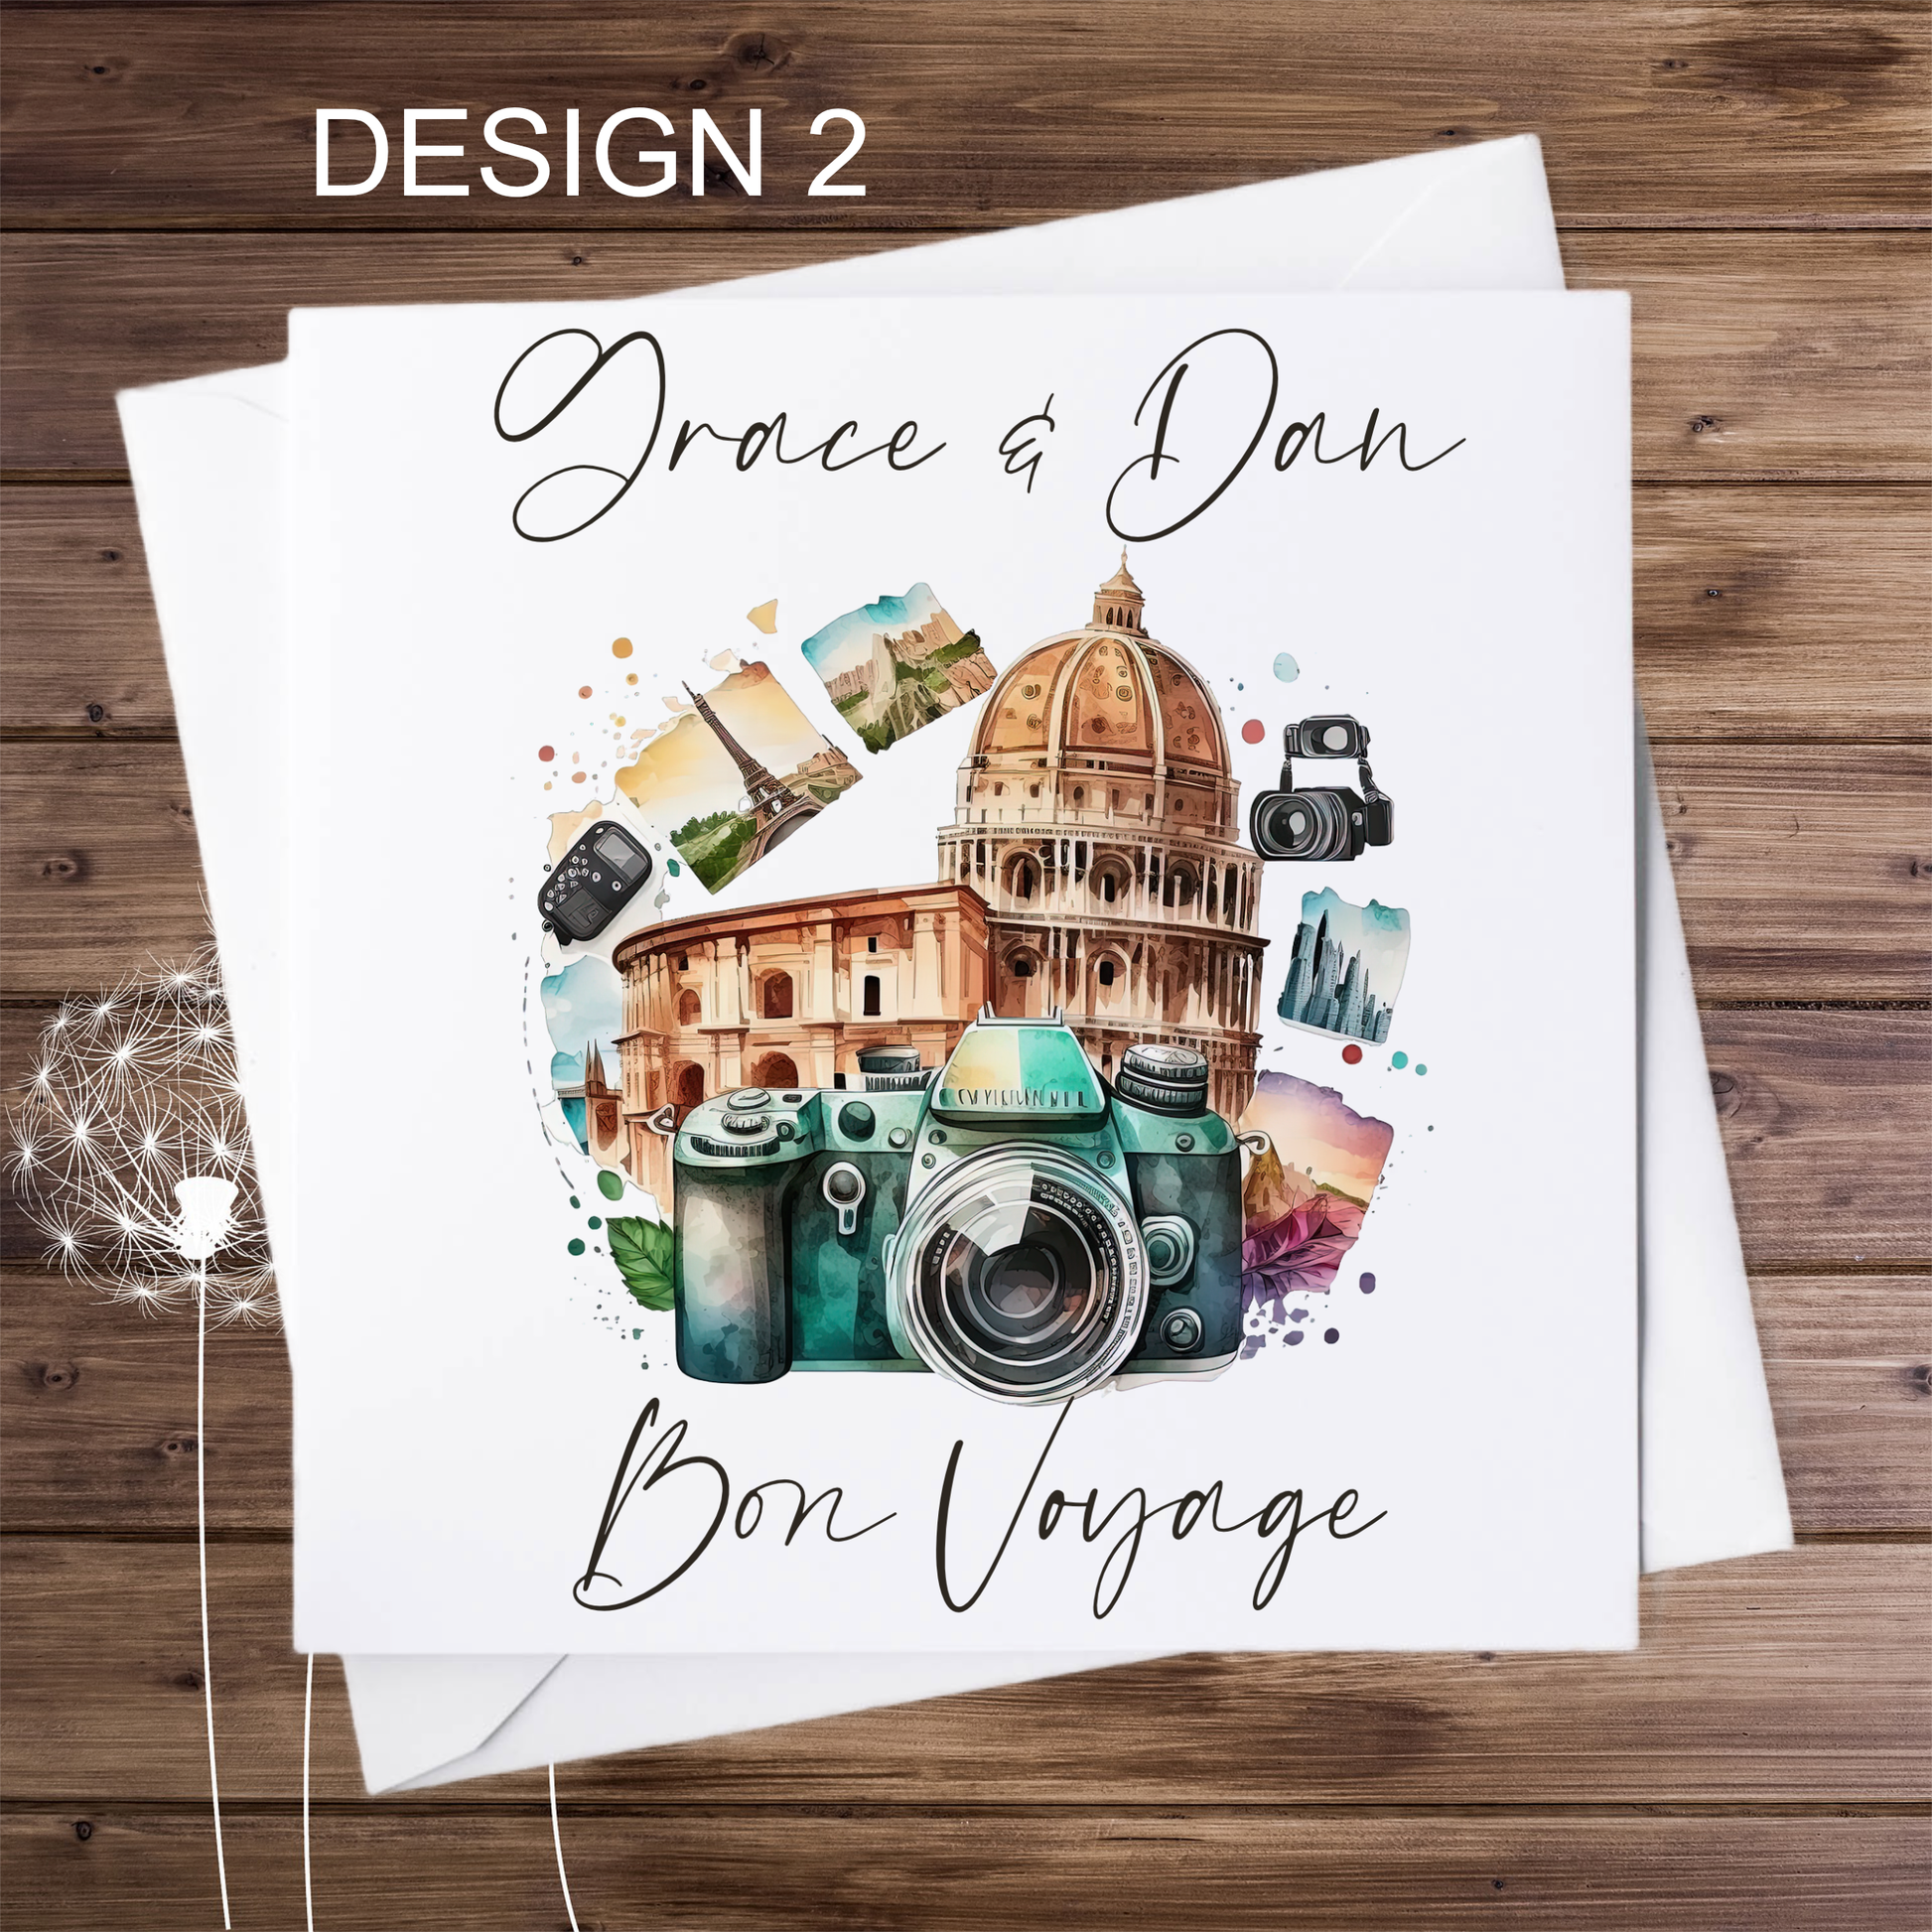 Bon Voyage personalised card with camera and landmarks design